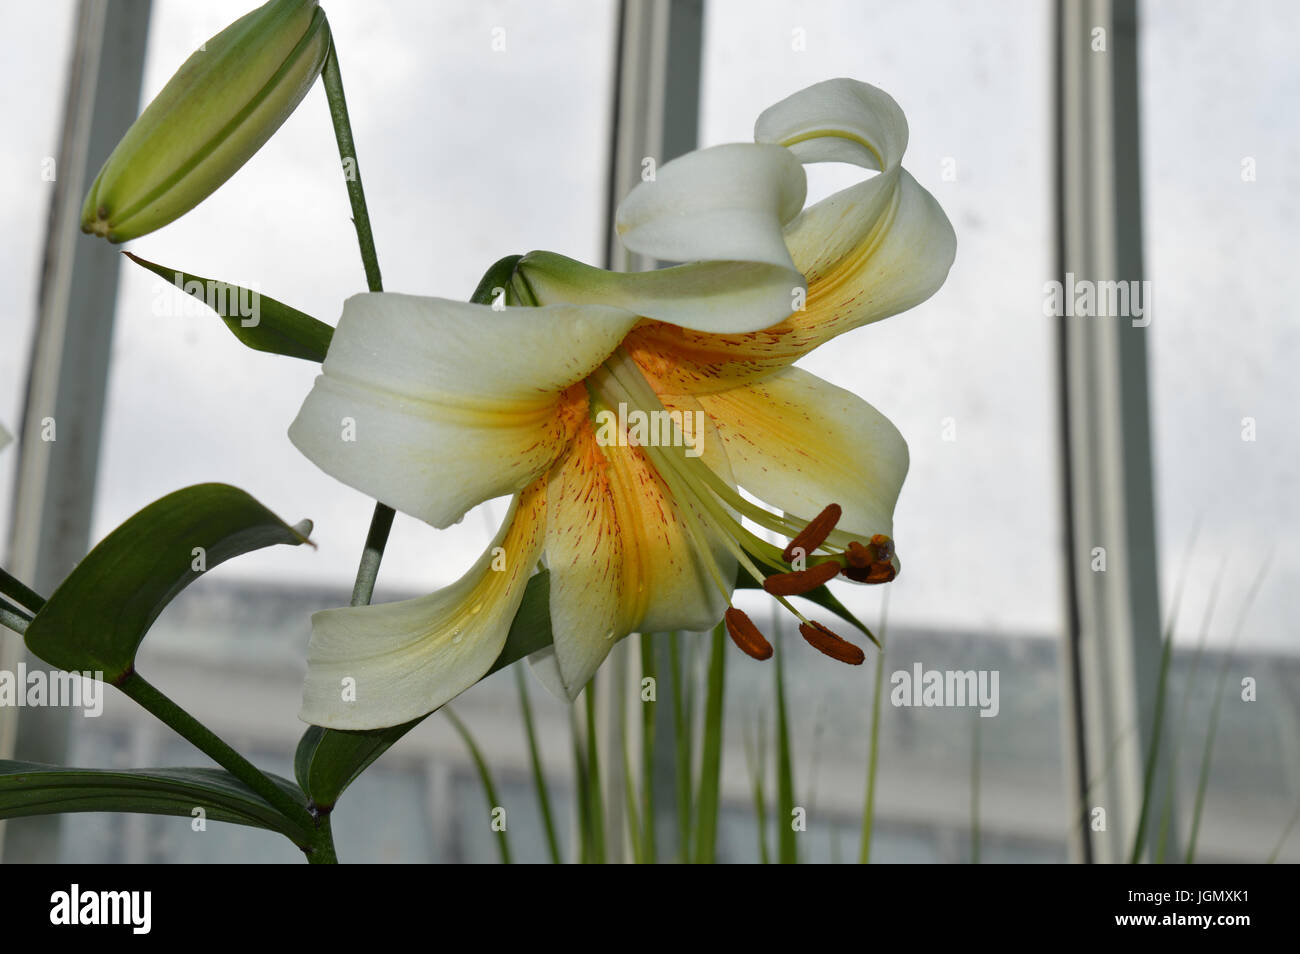 Lily flower in the greenhouse Stock Photo